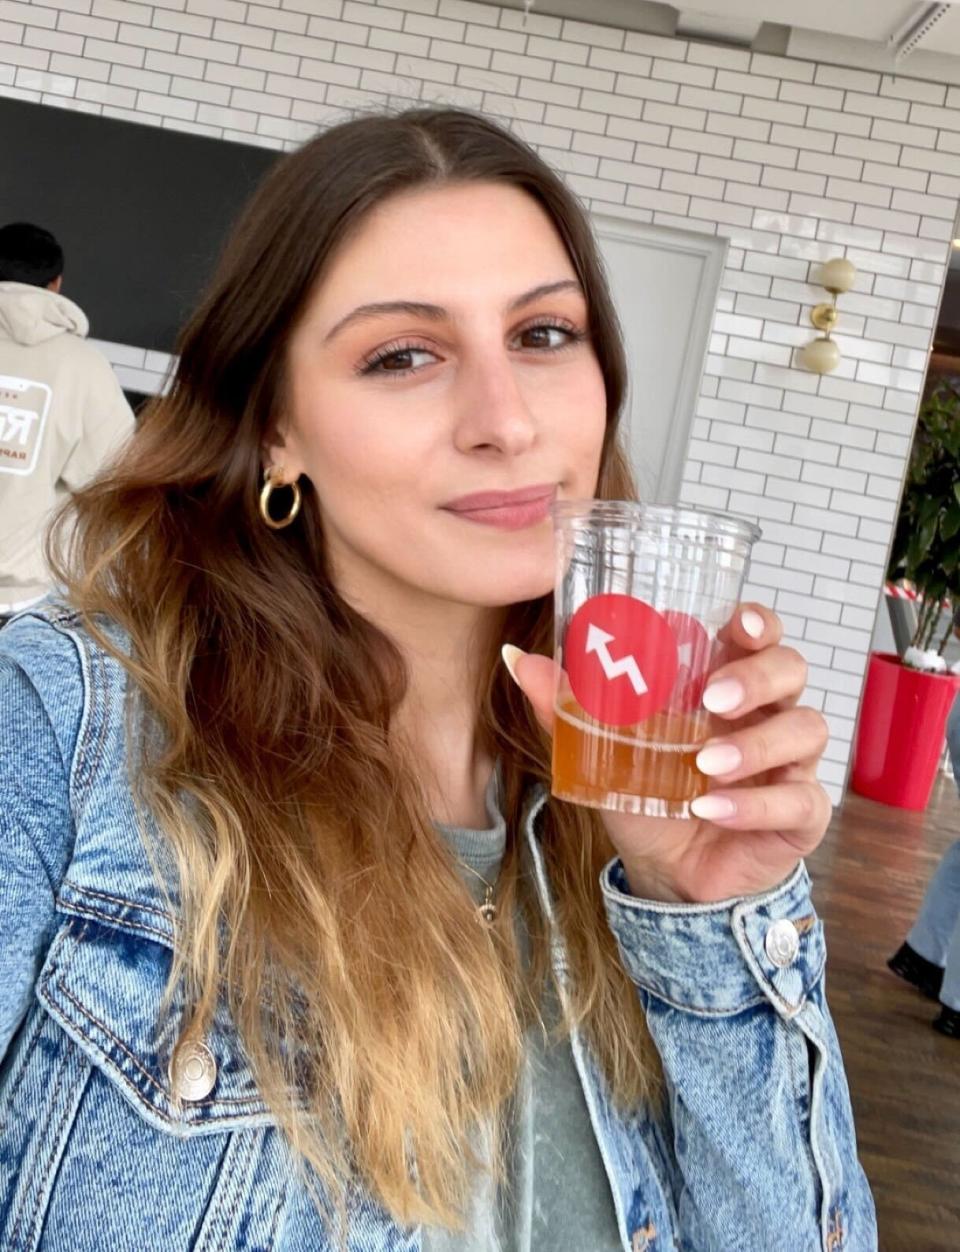 A woman wearing a denim jacket and holding a plastic cup containing a beverage